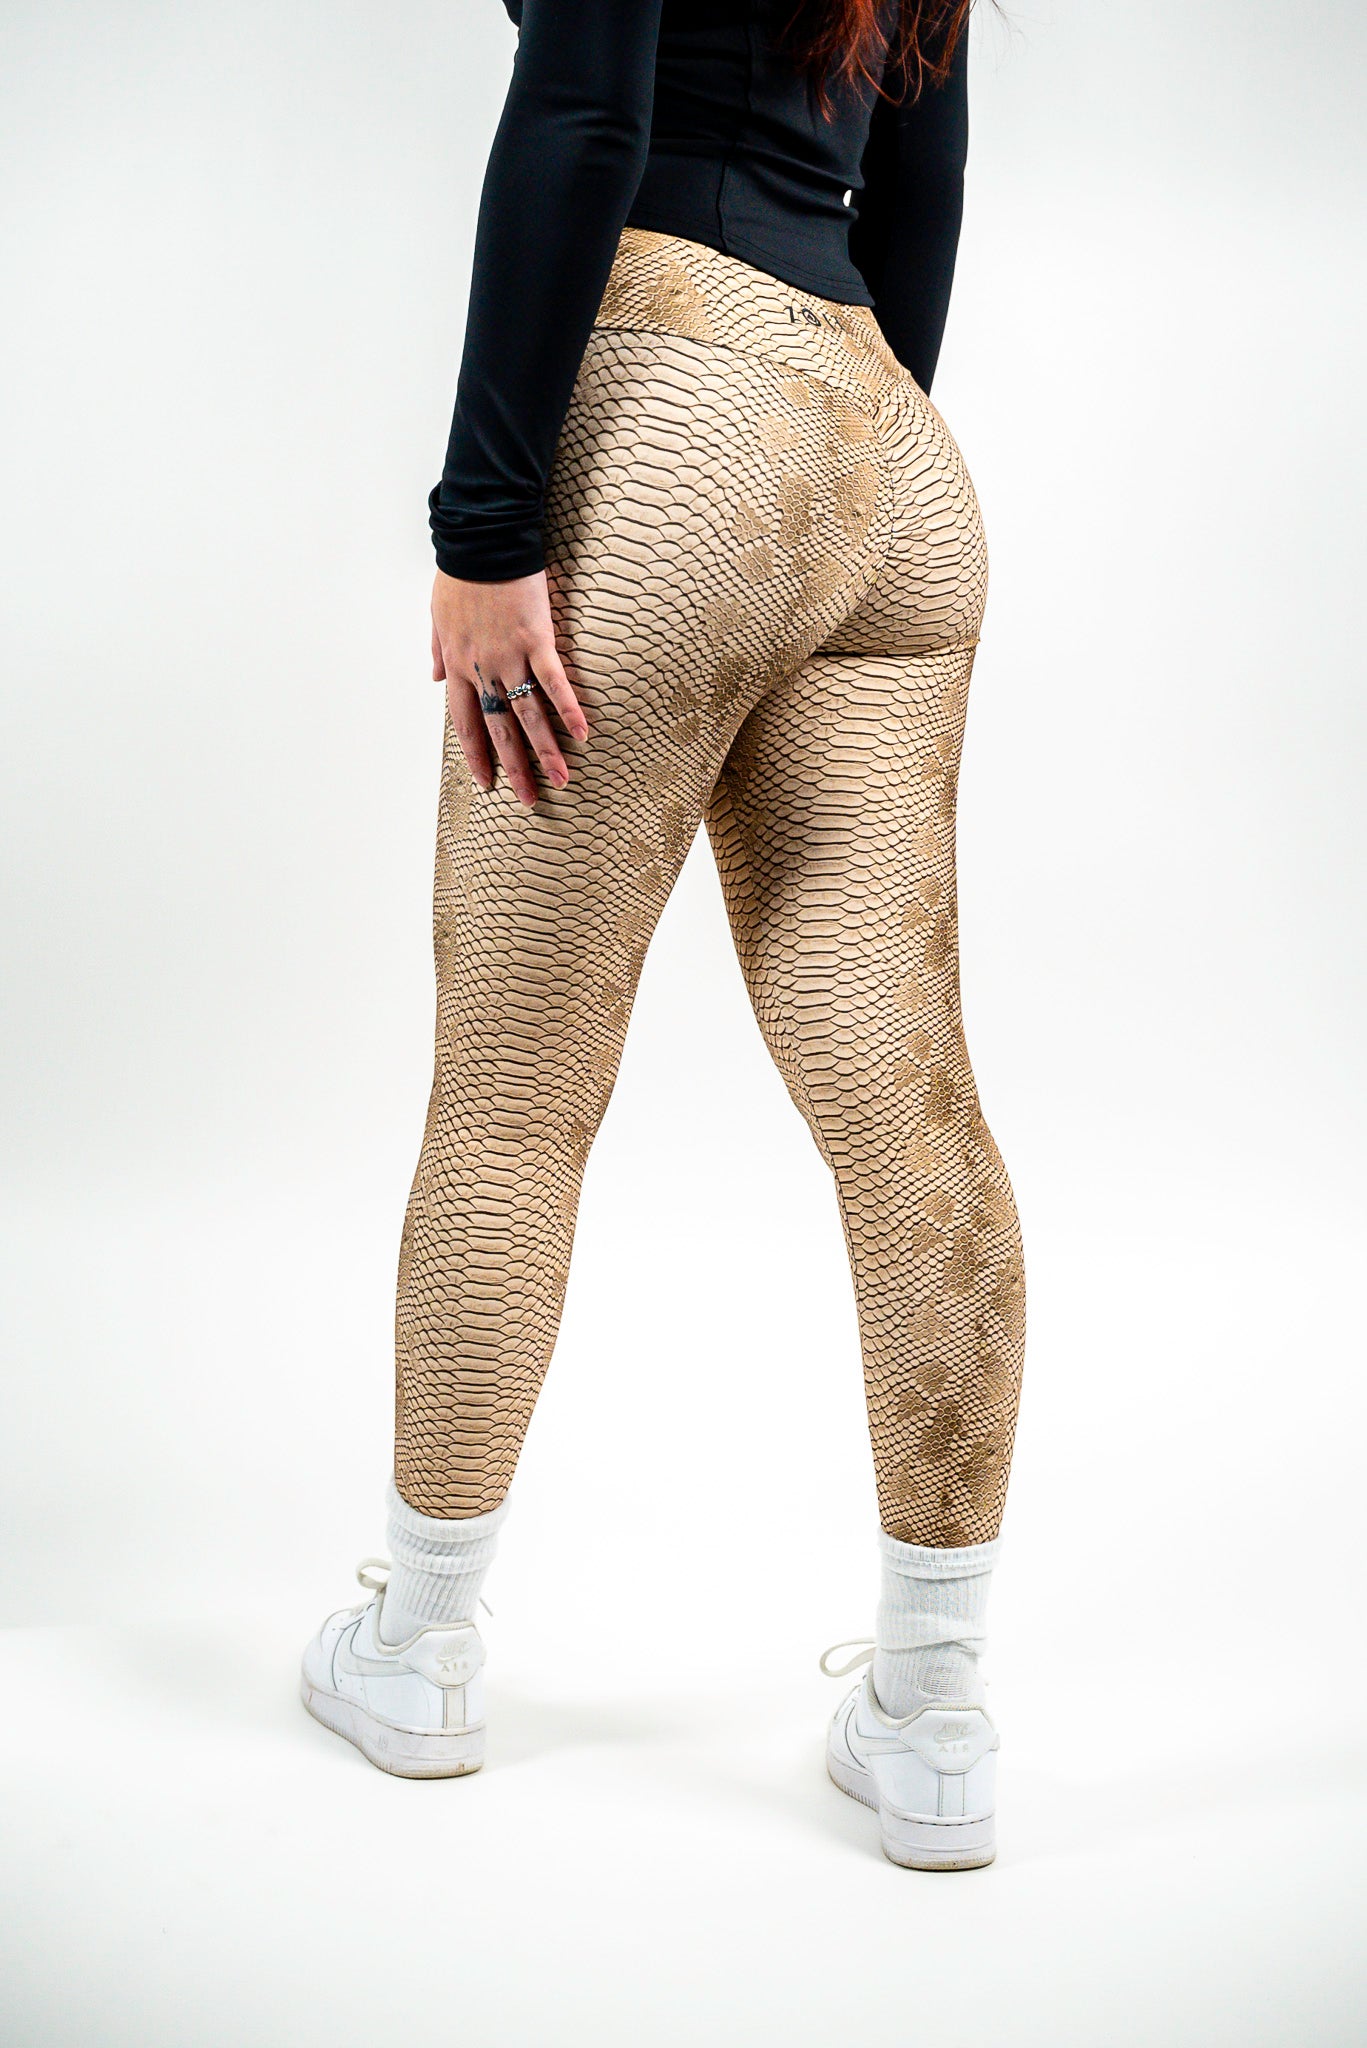 Beautiful Zoe is wearing size small in our snakeskin brazilian legging. Hips are 39 inches and waist 27 inches. Snakeskin Brazilian Fabric runs smaller in size, so size up if in between sizes. Mini scrunch, structured, tummy control, compressive, great coverage, squat proof, accentuating.